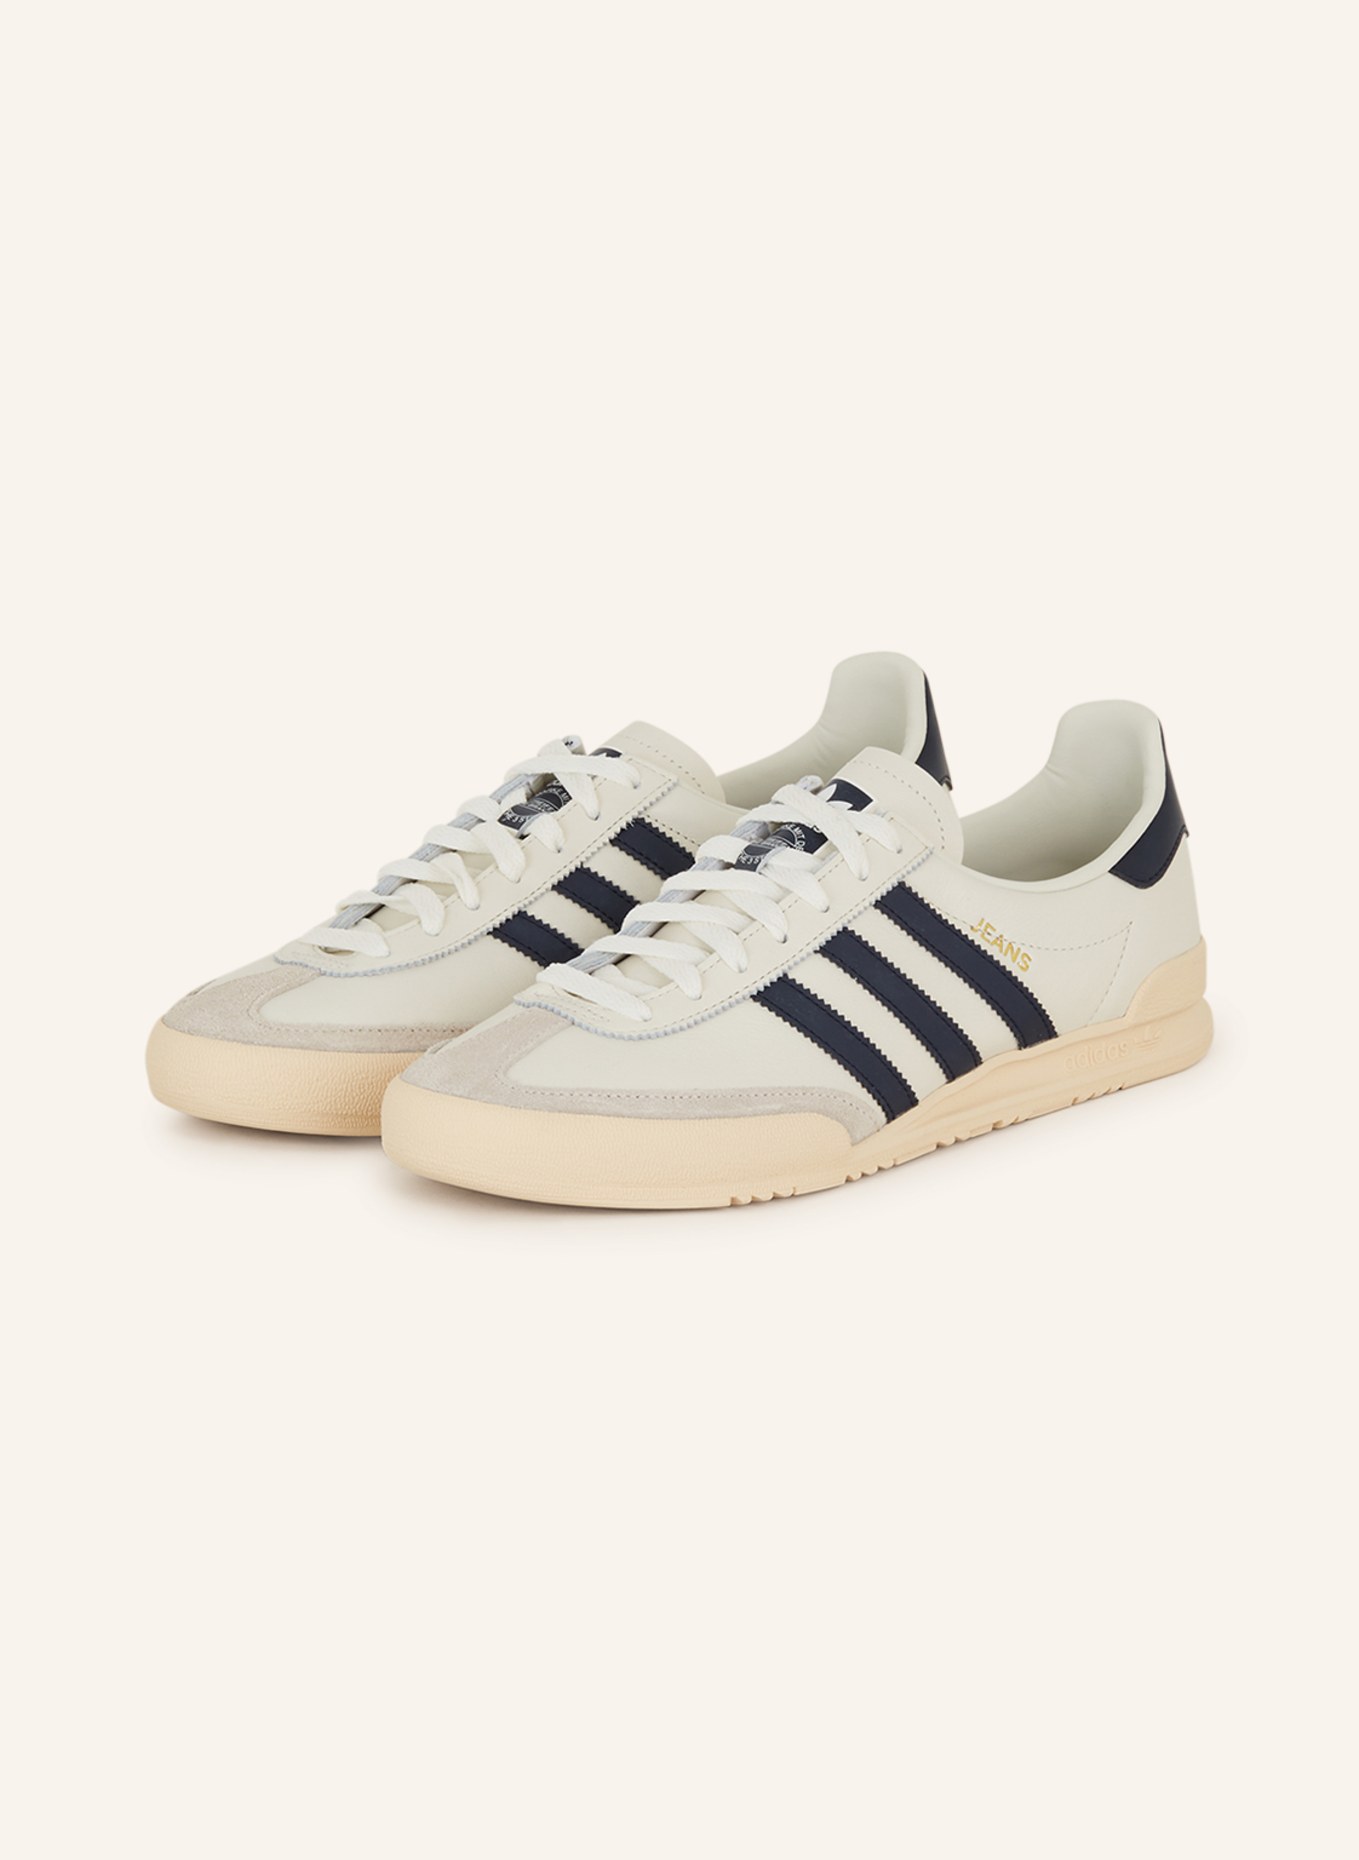 adidas Originals Sneakers JEANS in white/ light gray